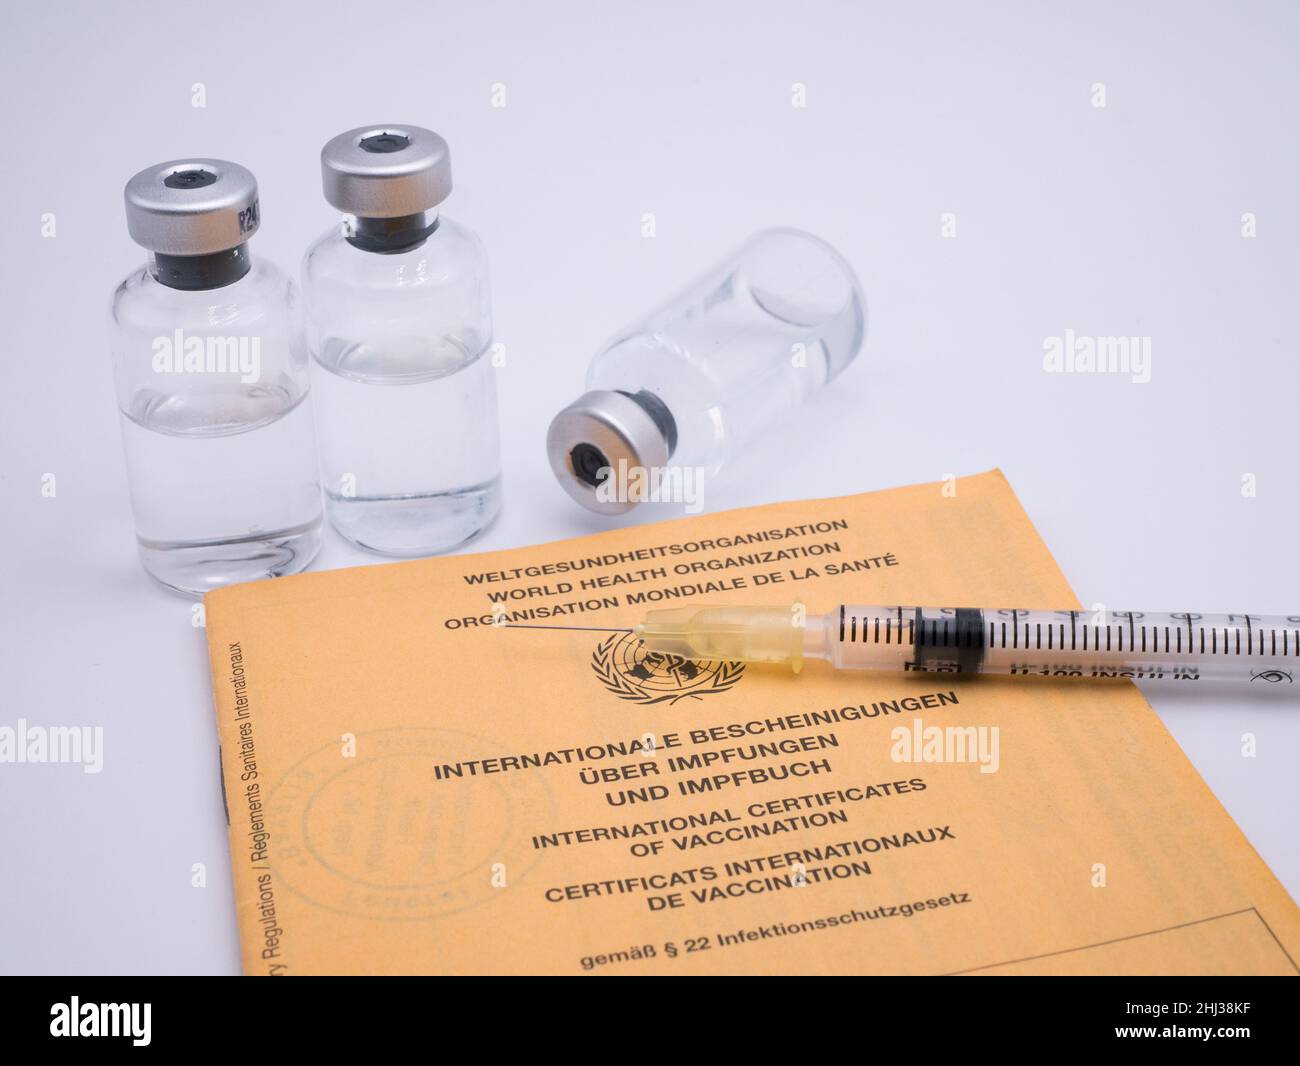 International vaccination certification with bottles of vaccine and syringe Stock Photo